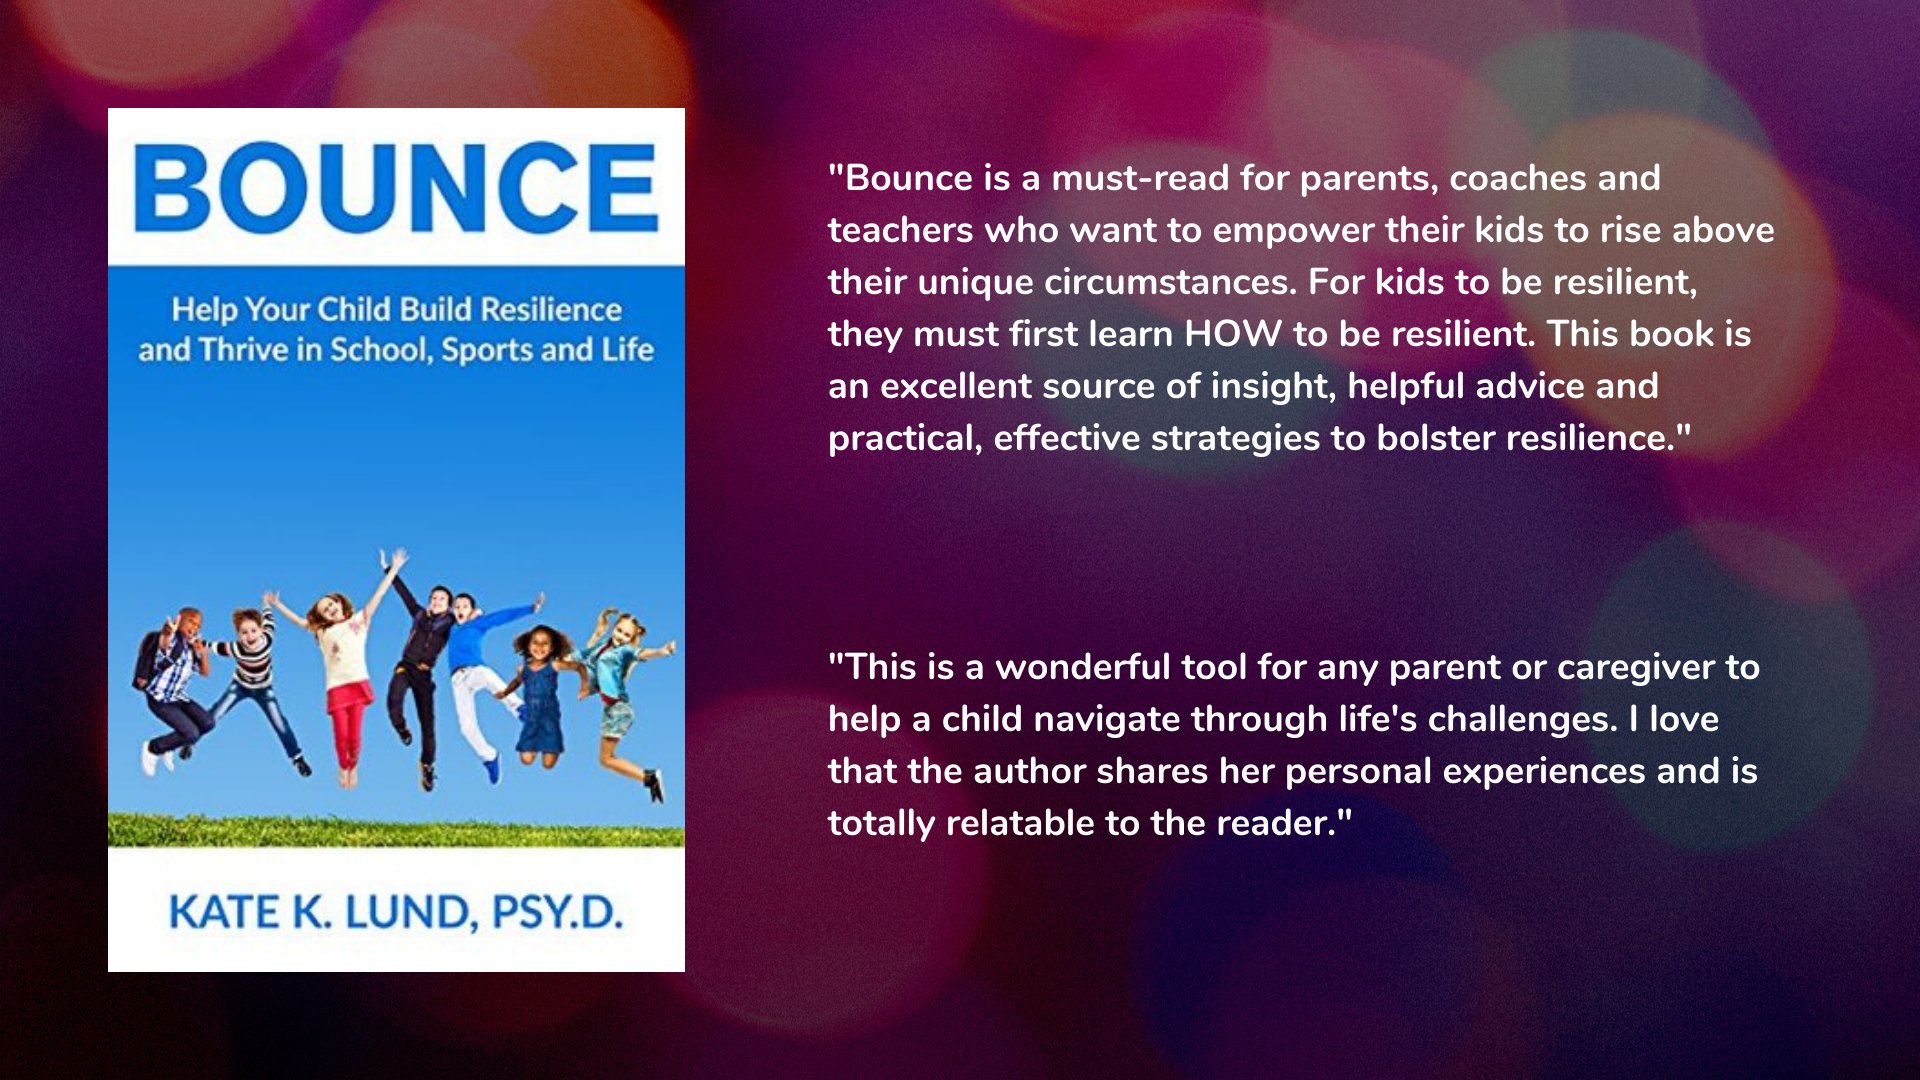 Bounce: Help Your Child Build Resilience and Thrive In School, Sports and Life